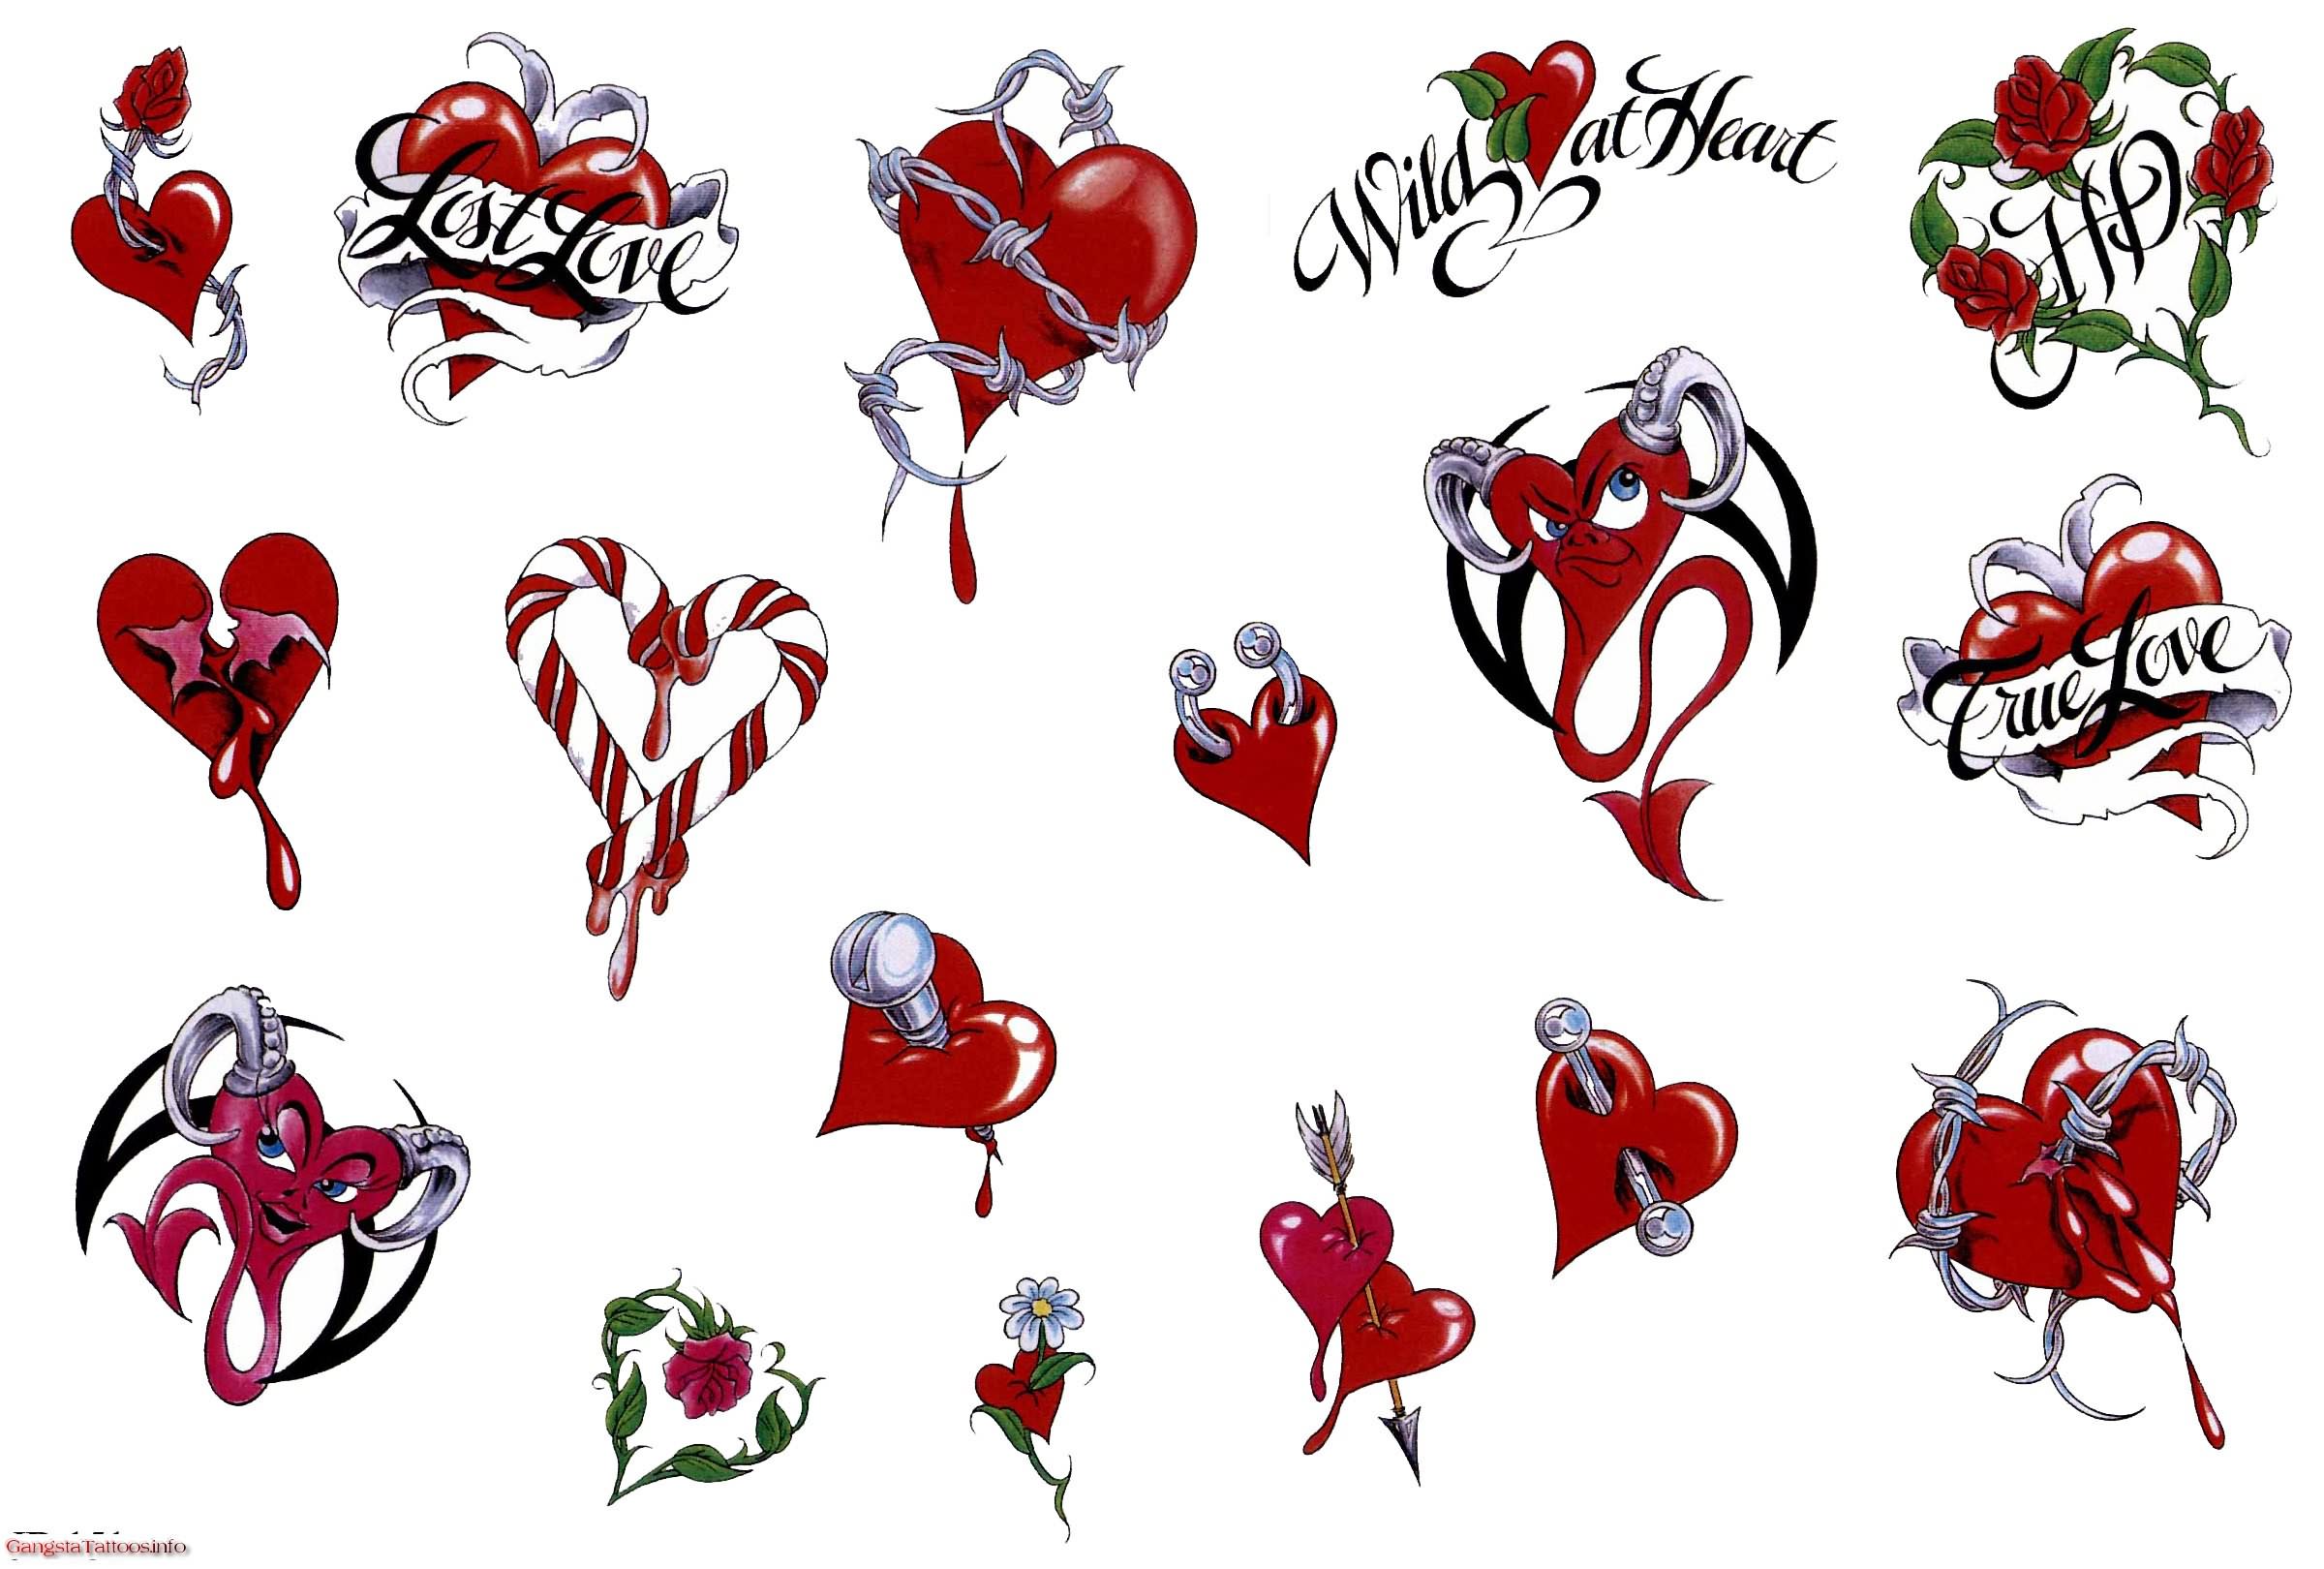 5. Ace of Hearts Tattoo Small - wide 4